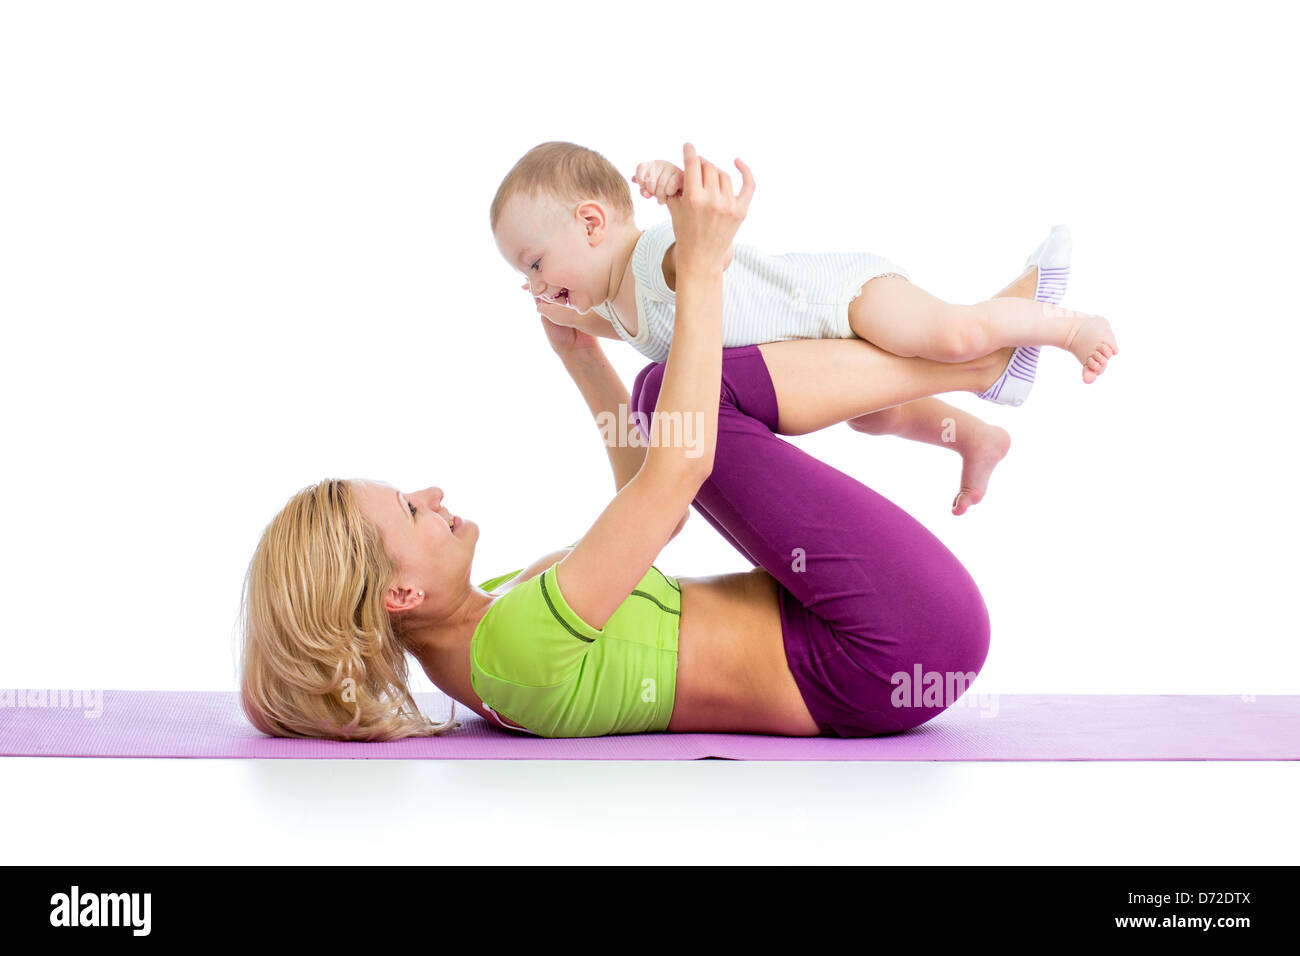 mother with baby doing gymnastics and fitness exercises Stock Photo